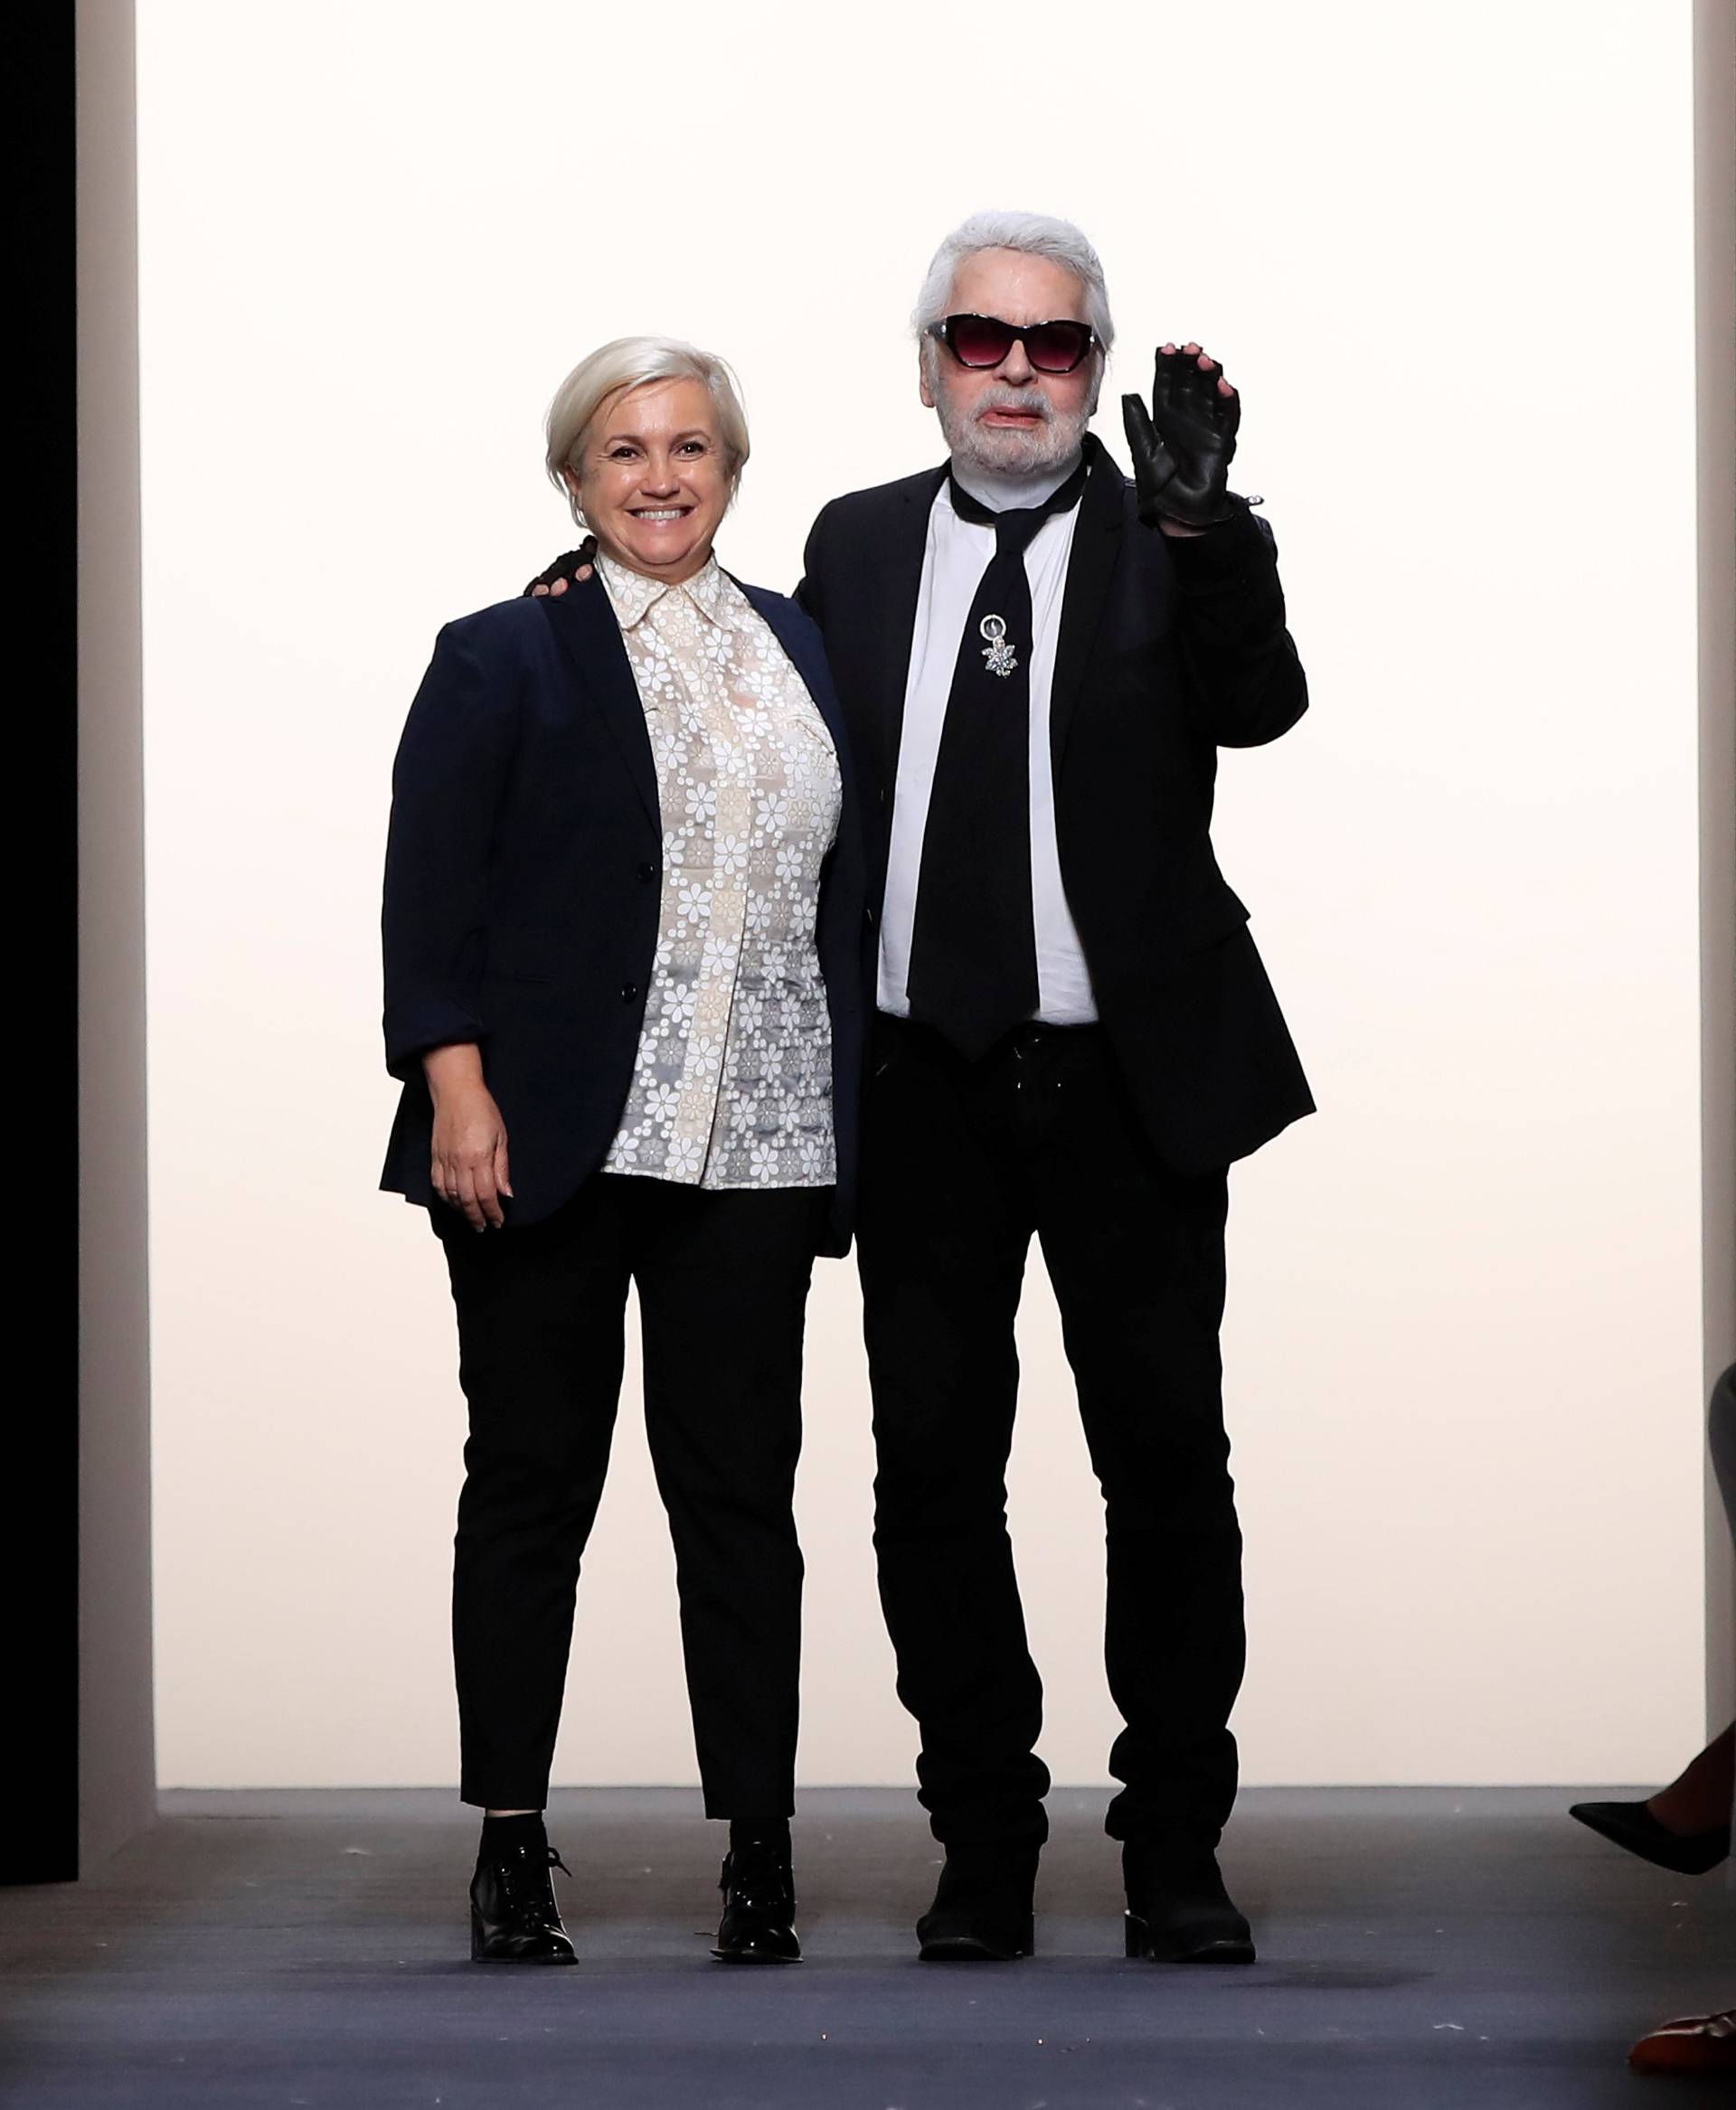 Designers Karl Lagerfeld and Silvia Venturini appears at the end of their Haute Couture Fall/Winter 2018/2019 collection show for fashion house Fendi in Paris